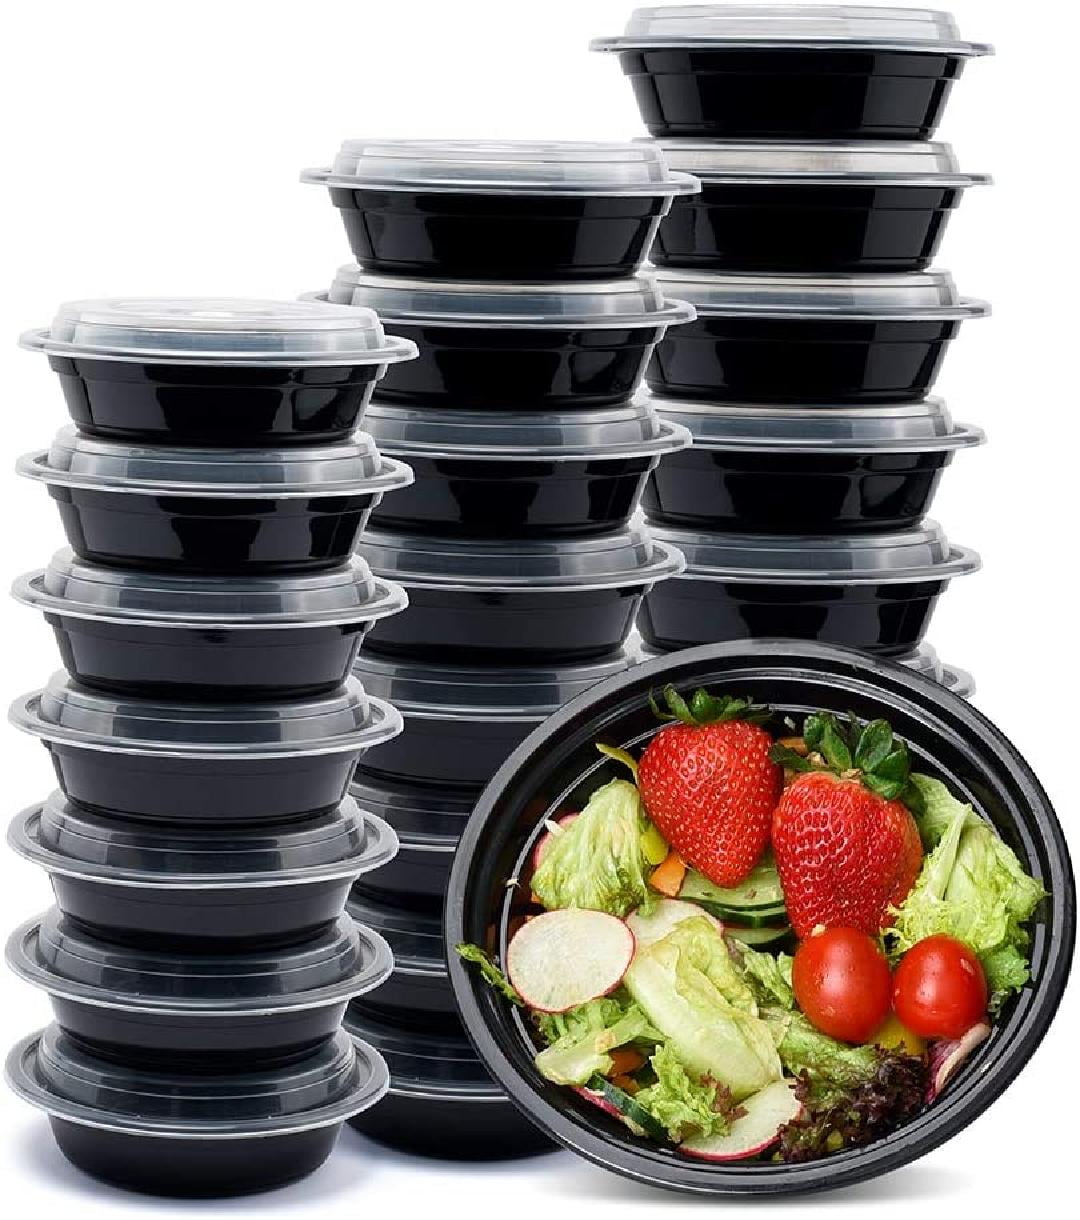 50pcs Meal Prep Container Disposable Food Containers With Lids Durable To  Go Containers Meal Planning Containers For Takeout Salad Container  Microwave Safe Bpa Free Stackable Take Out Containers Kitchen Items